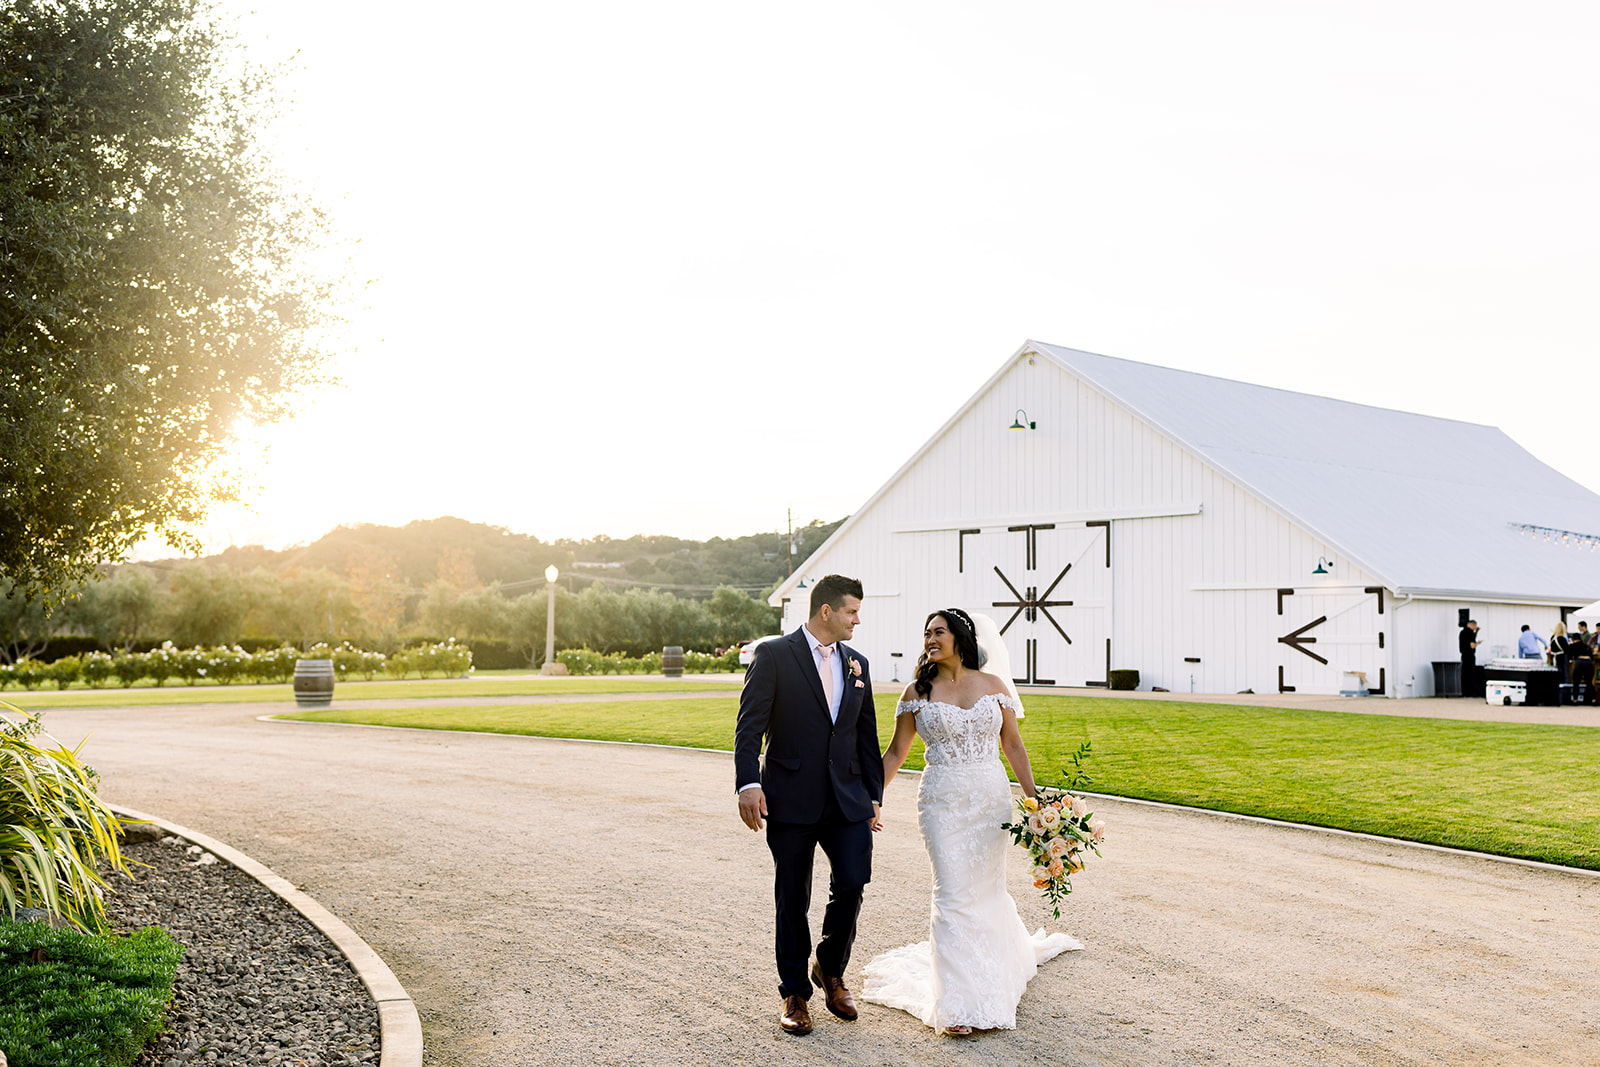 The couple's radiant smiles light up the frame against the picturesque backdrop of the San Luis Obispo landscape